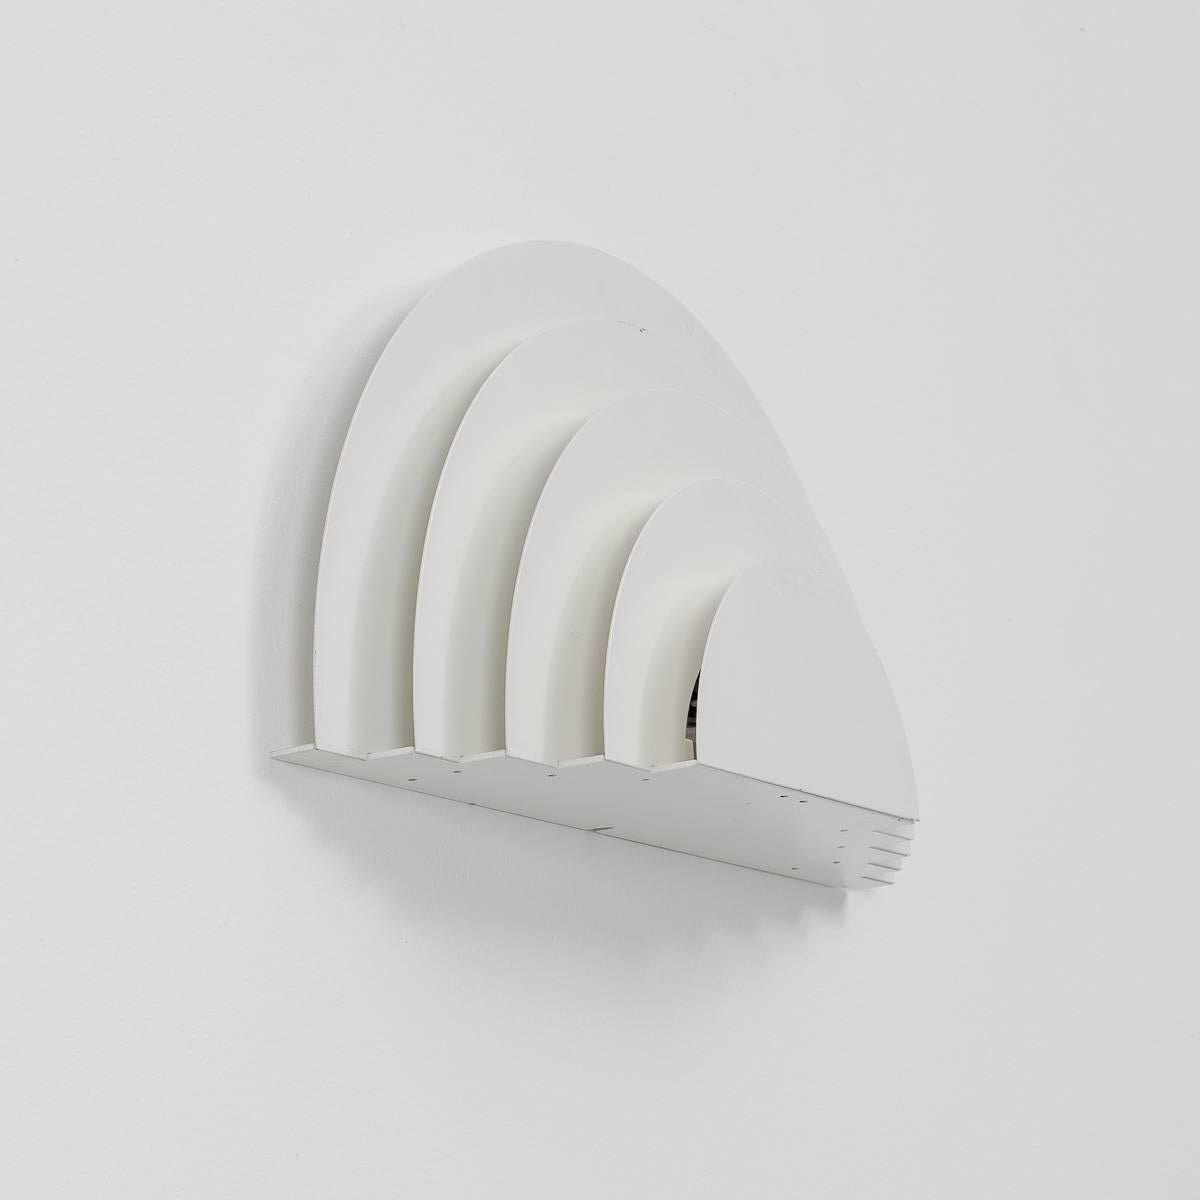 The Meander wall sconce designed by Cesare Casati and Emanuele Ponzi, was produced by RAAK, a leading manufacturer of Dutch midcentury lighting. Like the contours of a hill on a map. Or a rainbow silhouette. It is unashamedly simplistic in nature